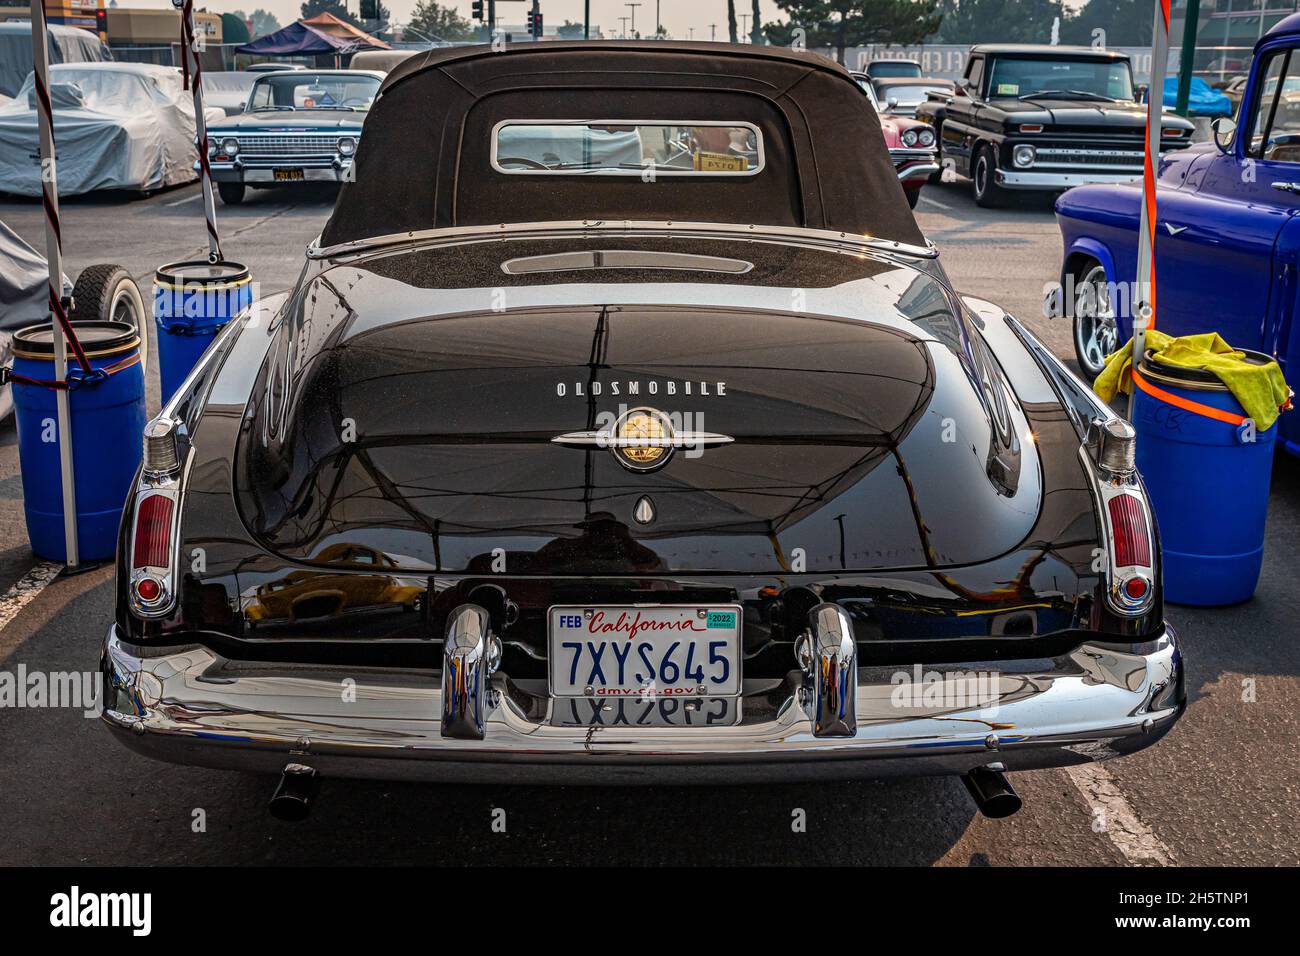 Reno, NV - August 6, 2021: 1950 Oldsmobile Rocket 88 Convertible at a local car show. Stock Photo